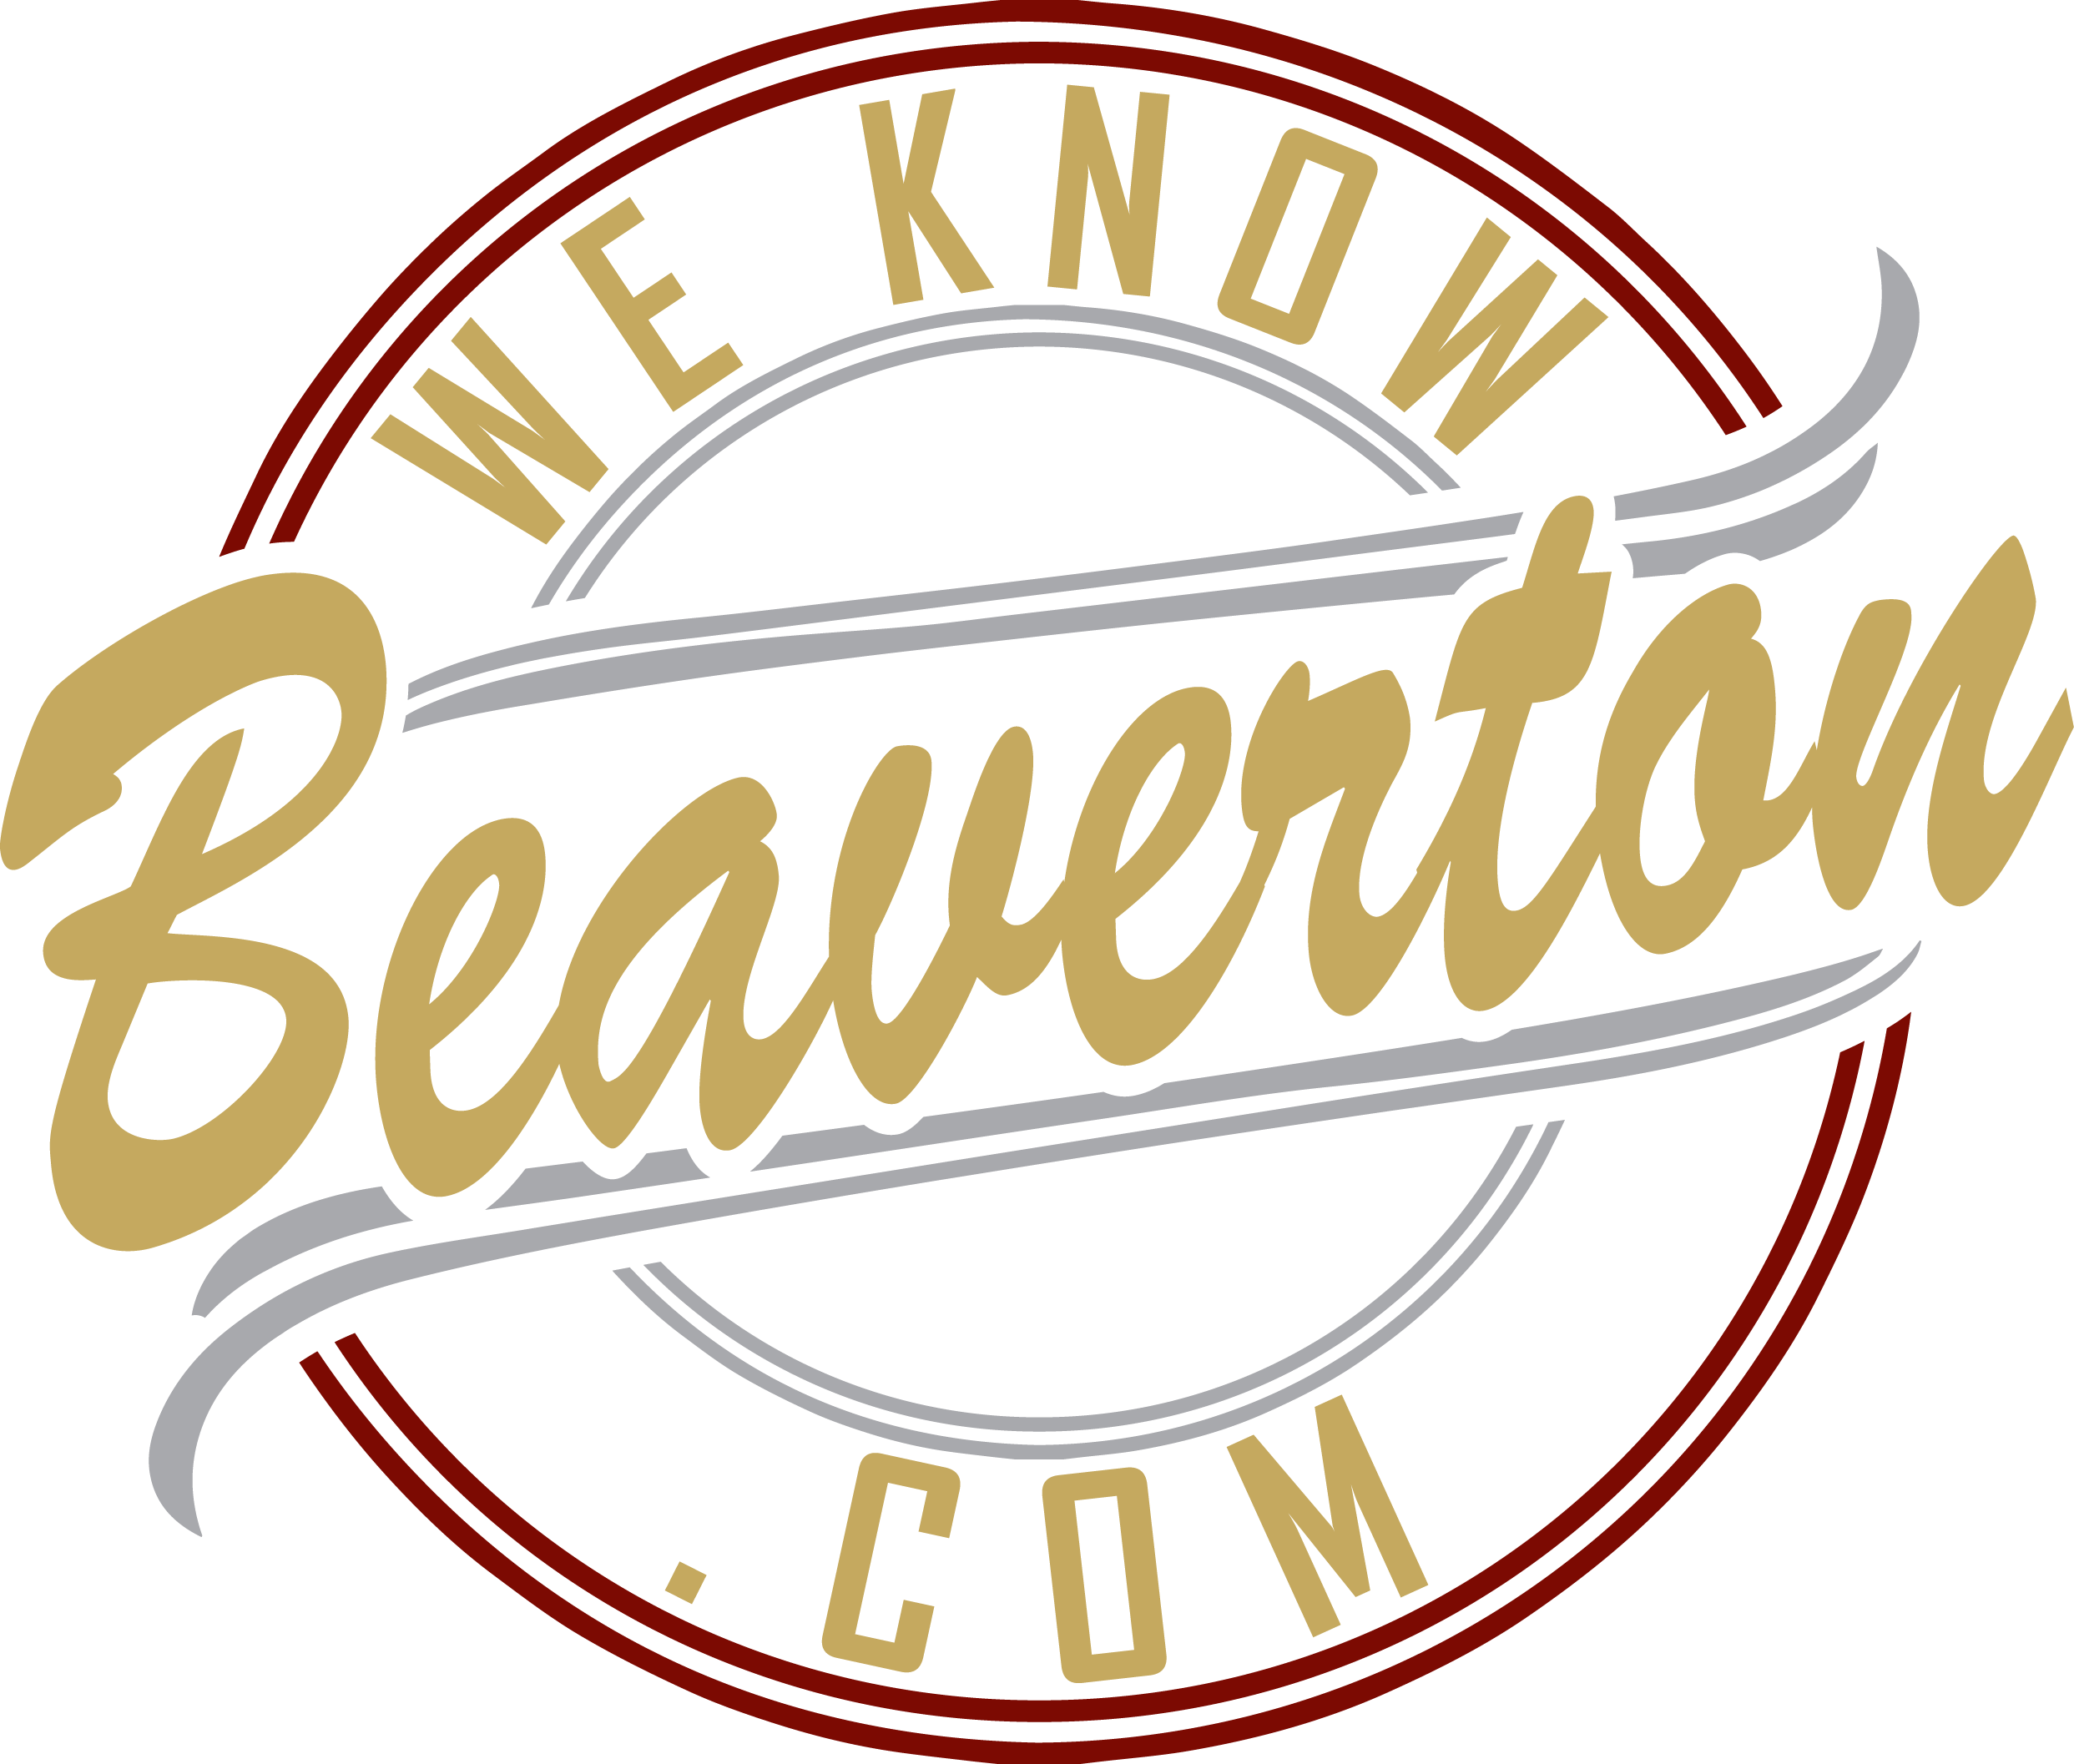 We Know Beaverton Real Estate and Beaverton Homes For Sale